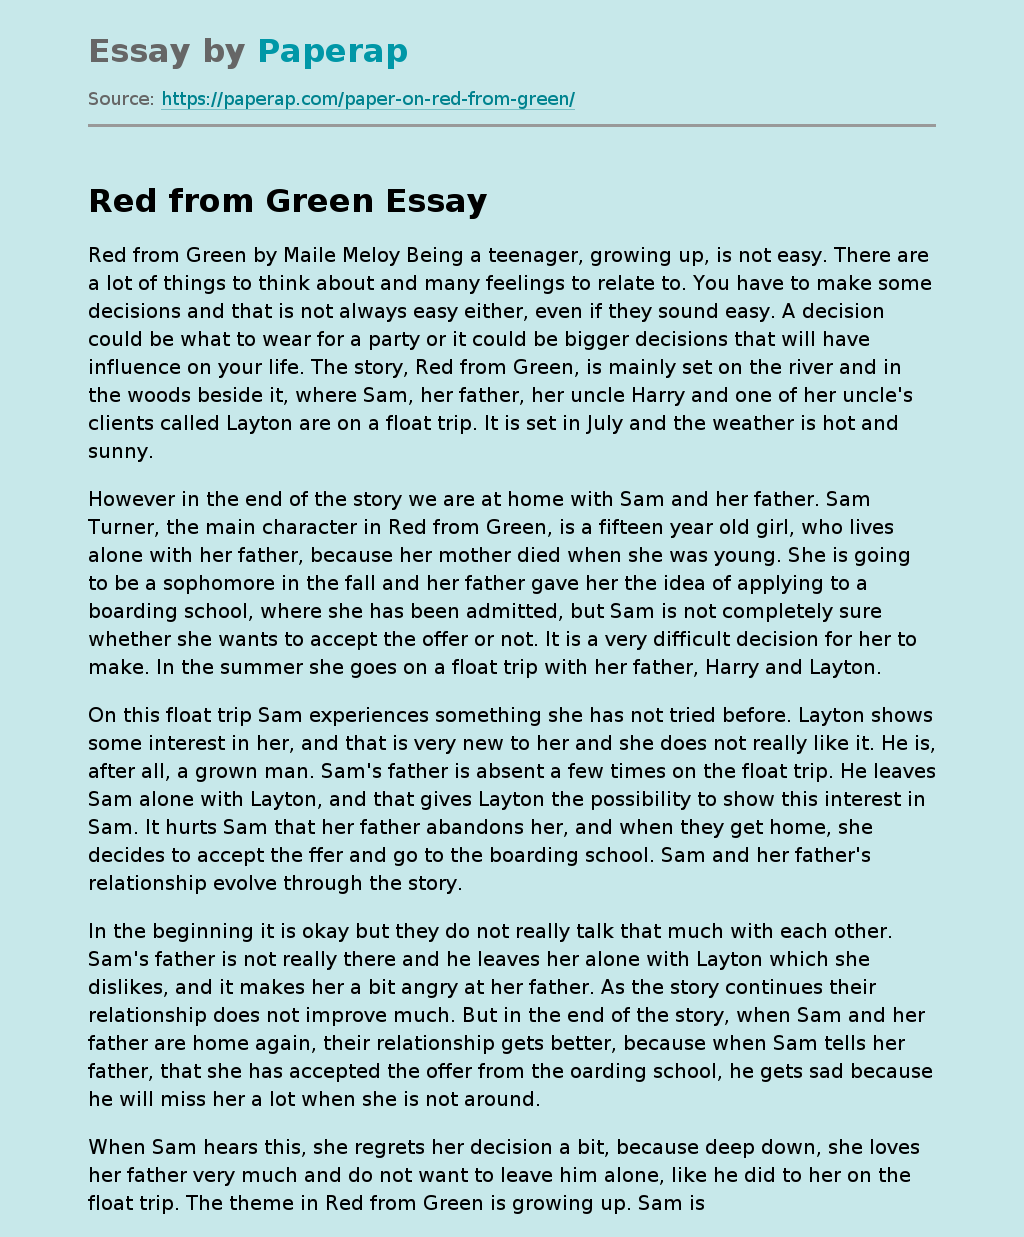 Red from Green by Maile Meloy